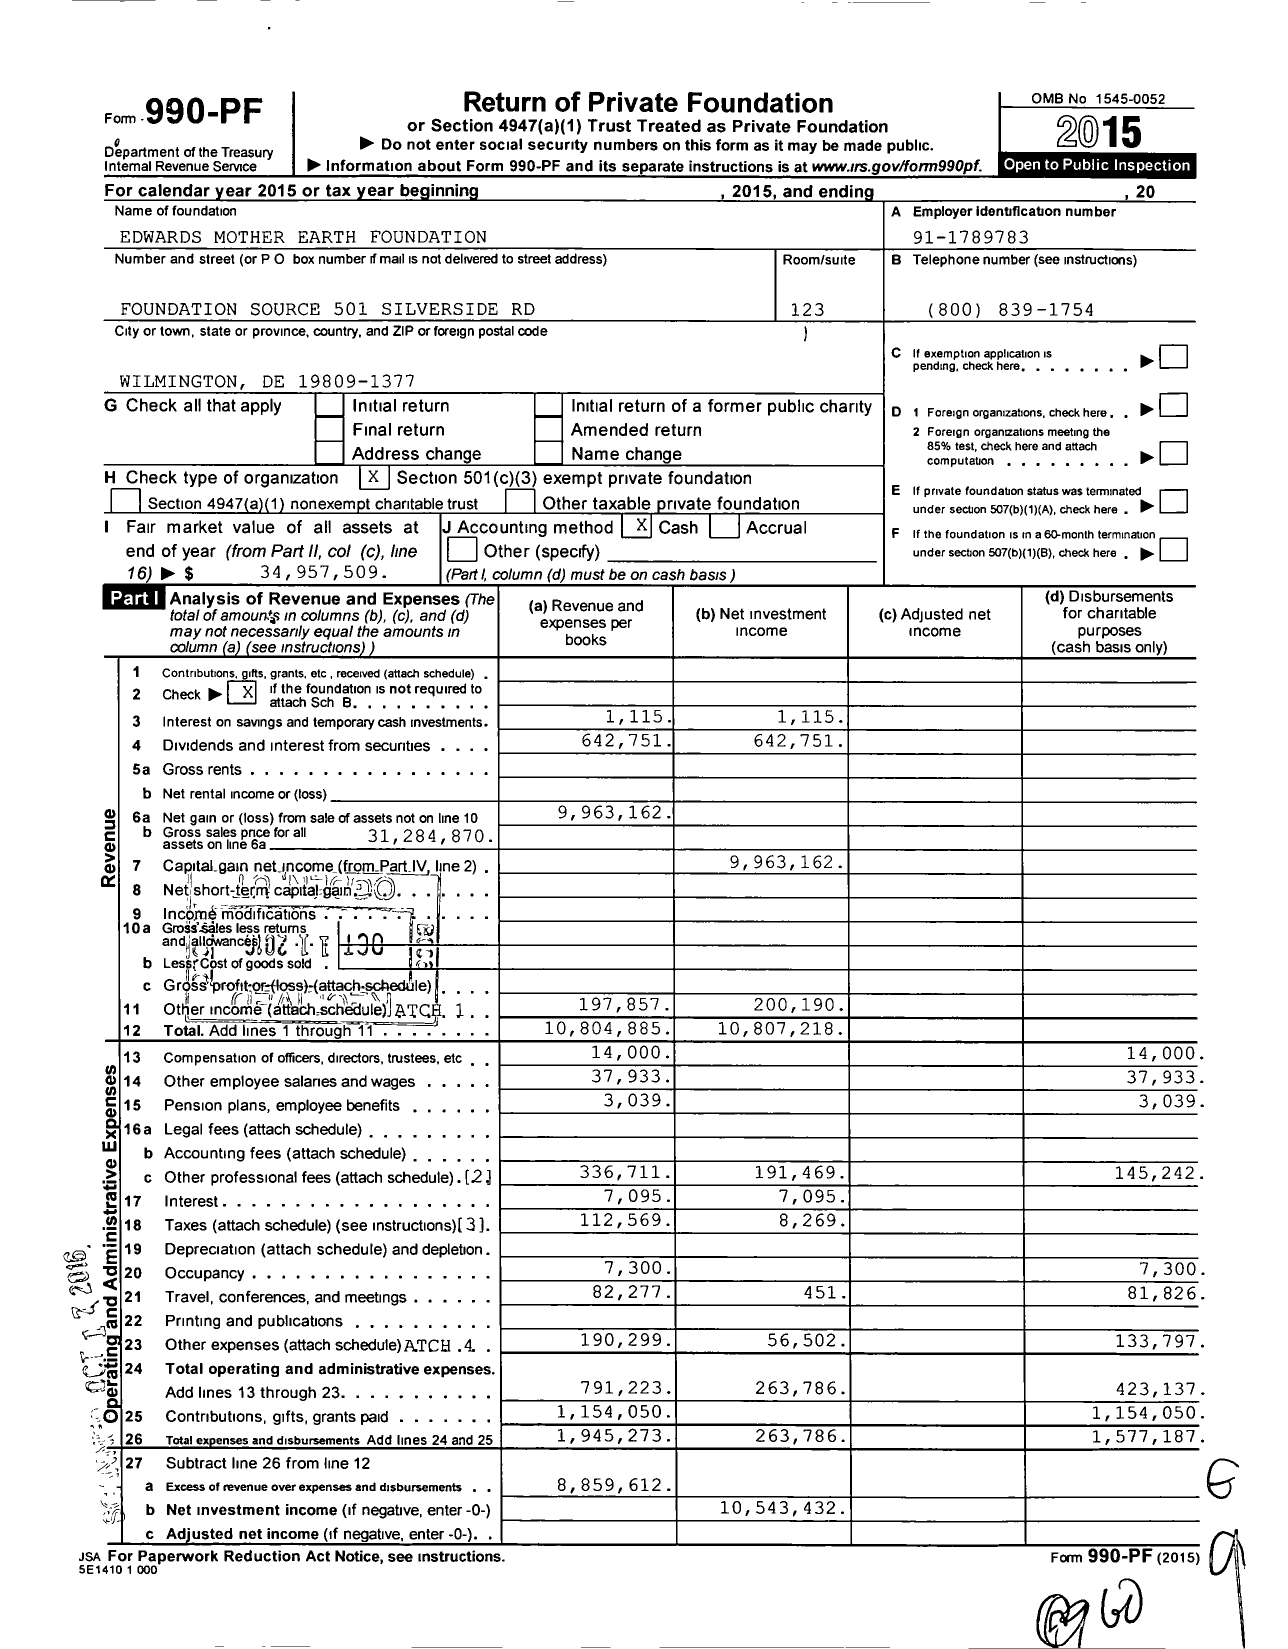 Image of first page of 2015 Form 990PF for Edwards Mother Earth Foundation